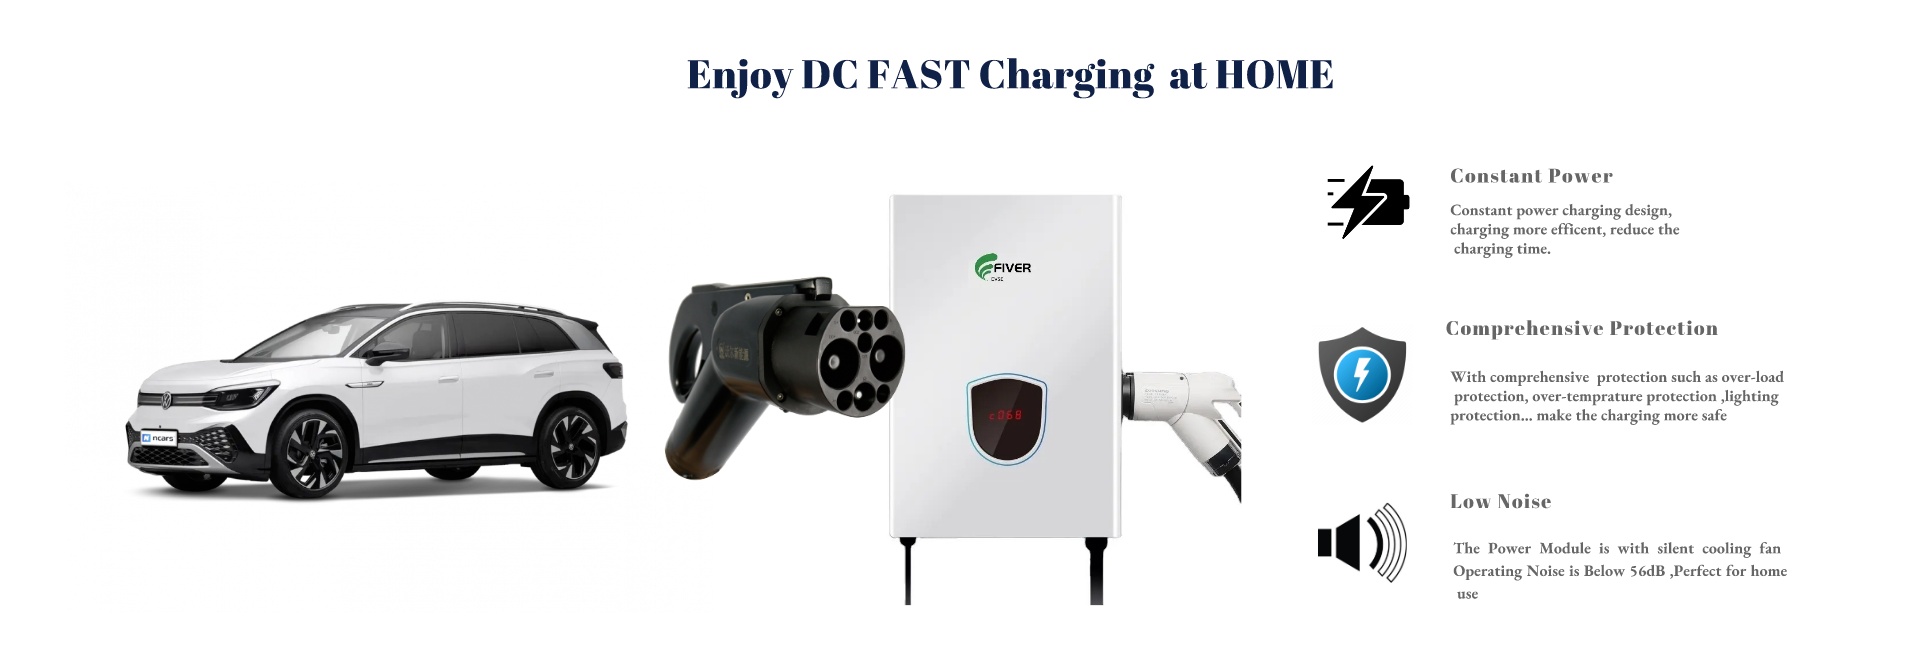 DC Fast Charging at Home